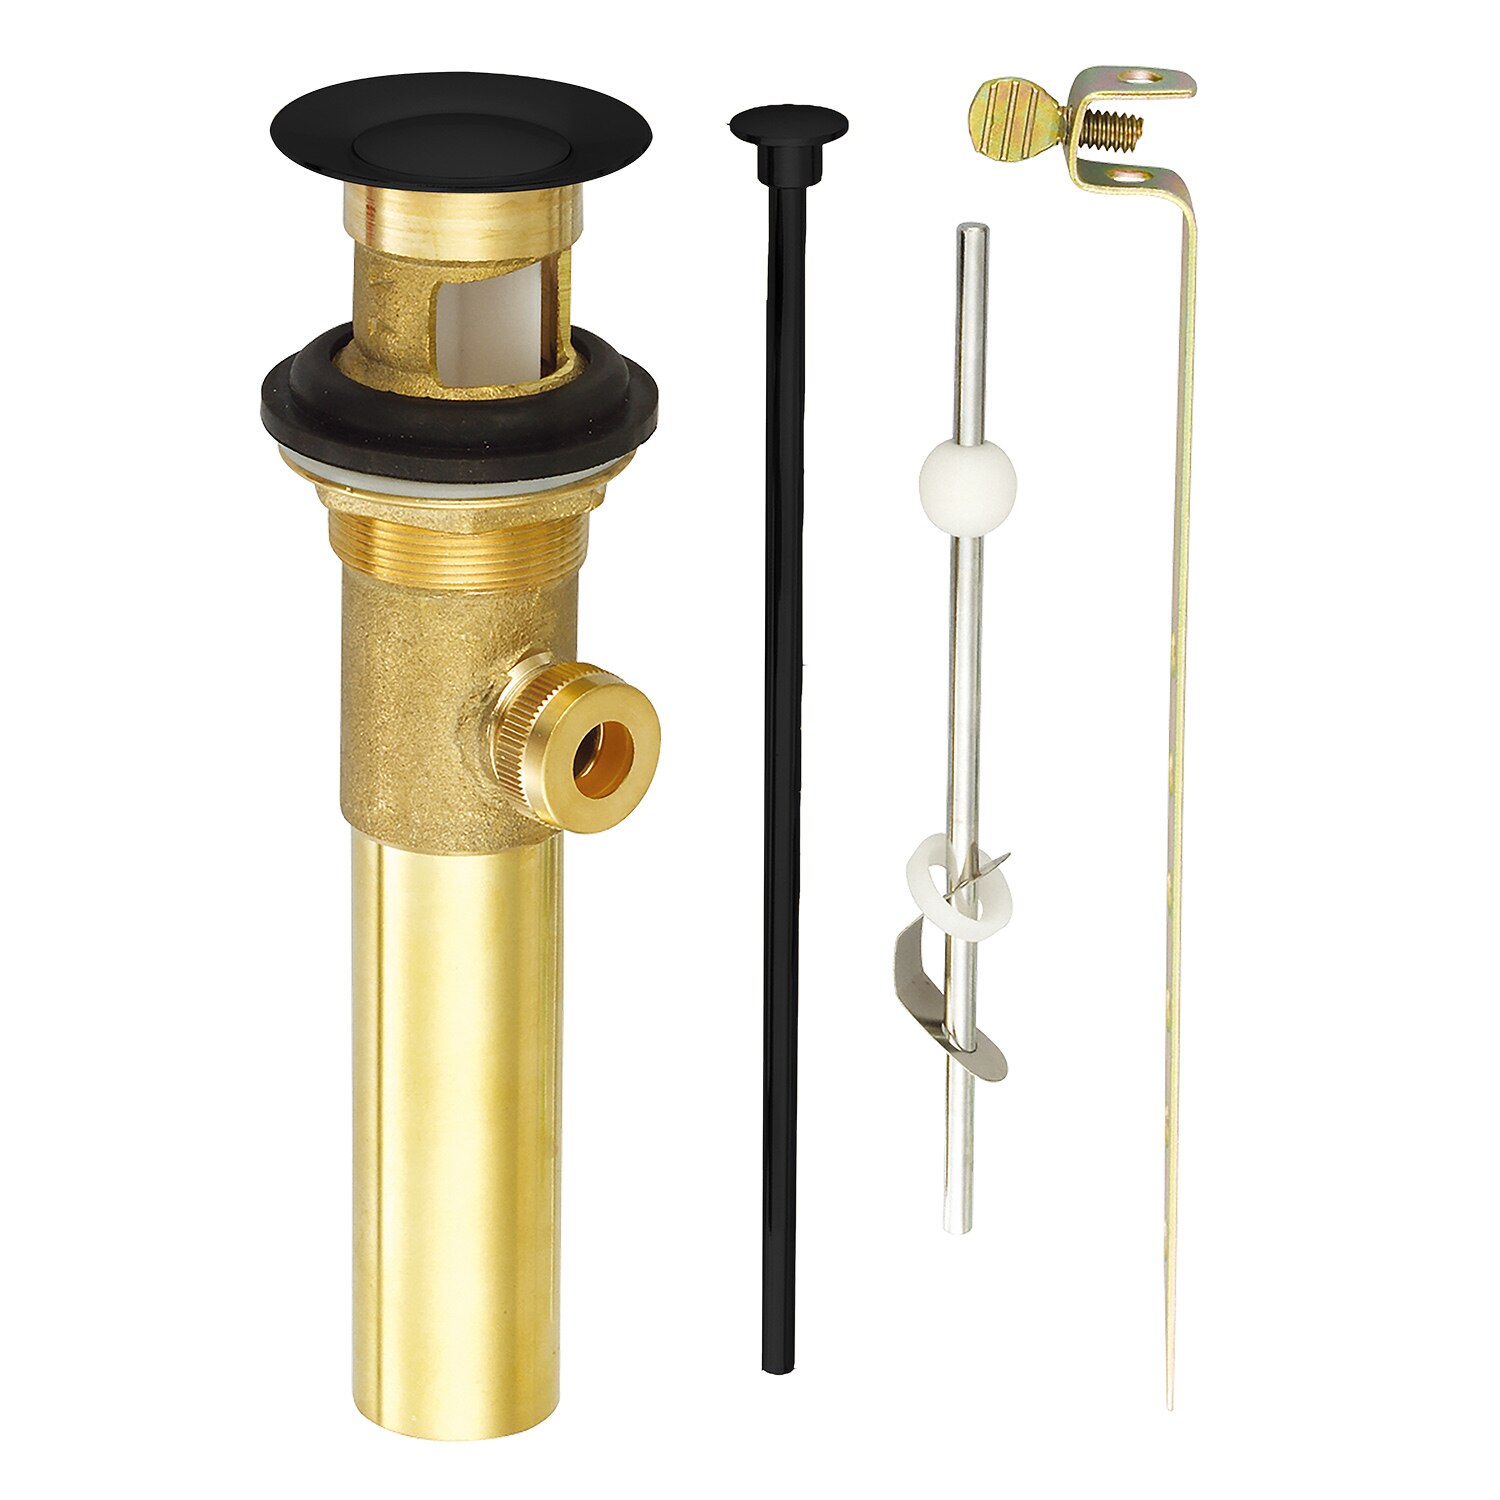 Details about   Drain Assembly with Pivot Rod Flange & Stopper Durable Brass Construction Silver 